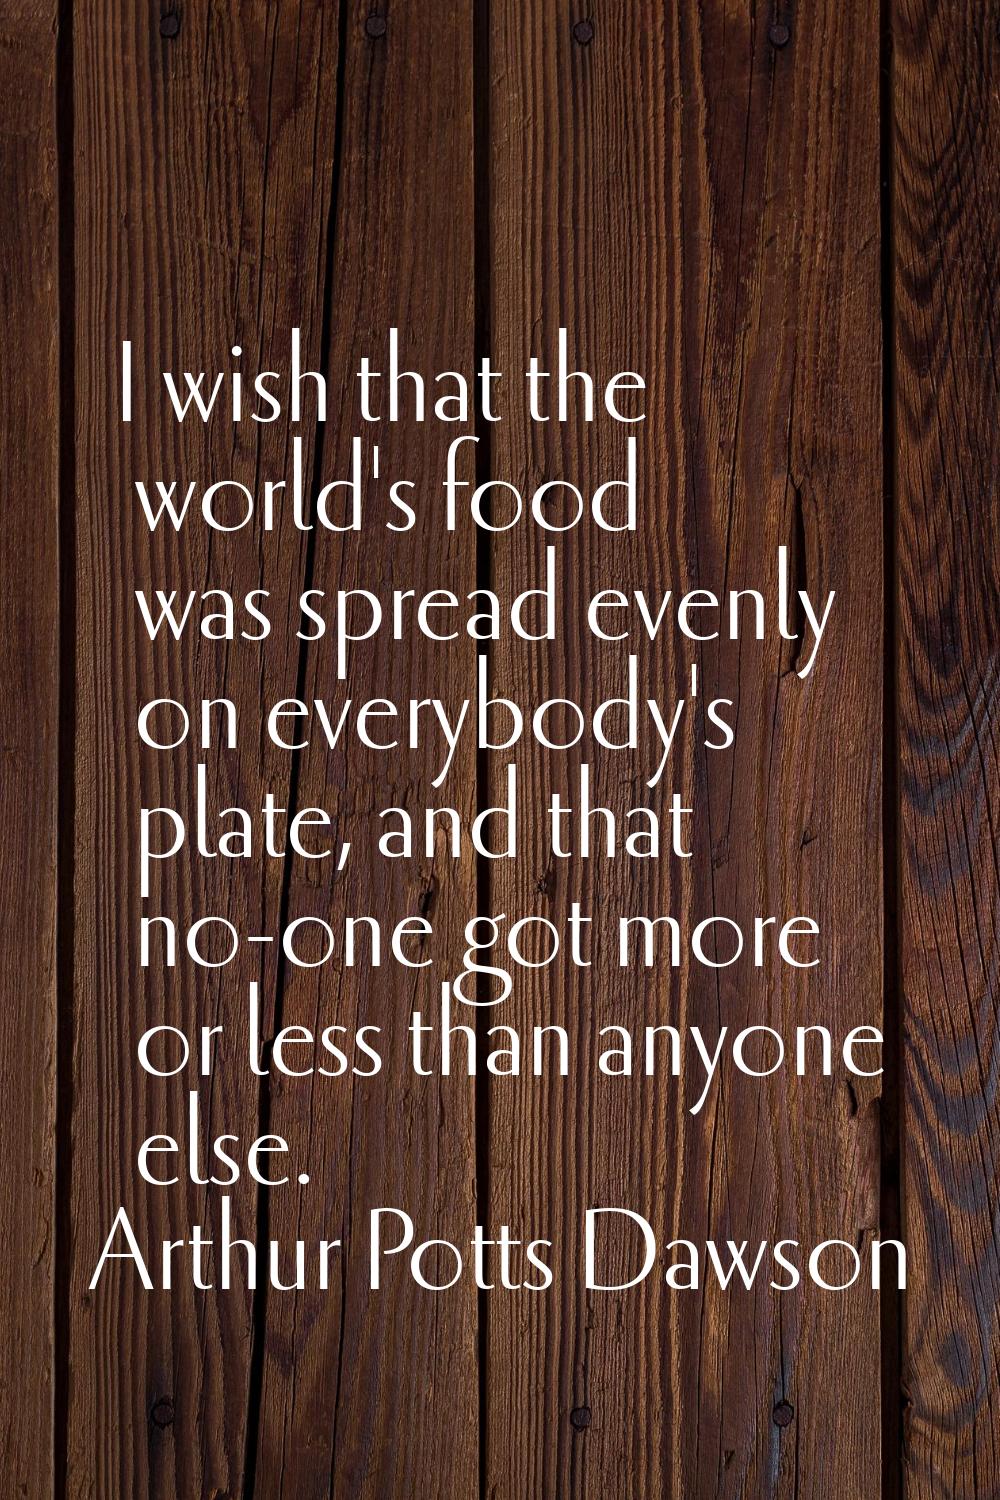 I wish that the world's food was spread evenly on everybody's plate, and that no-one got more or le